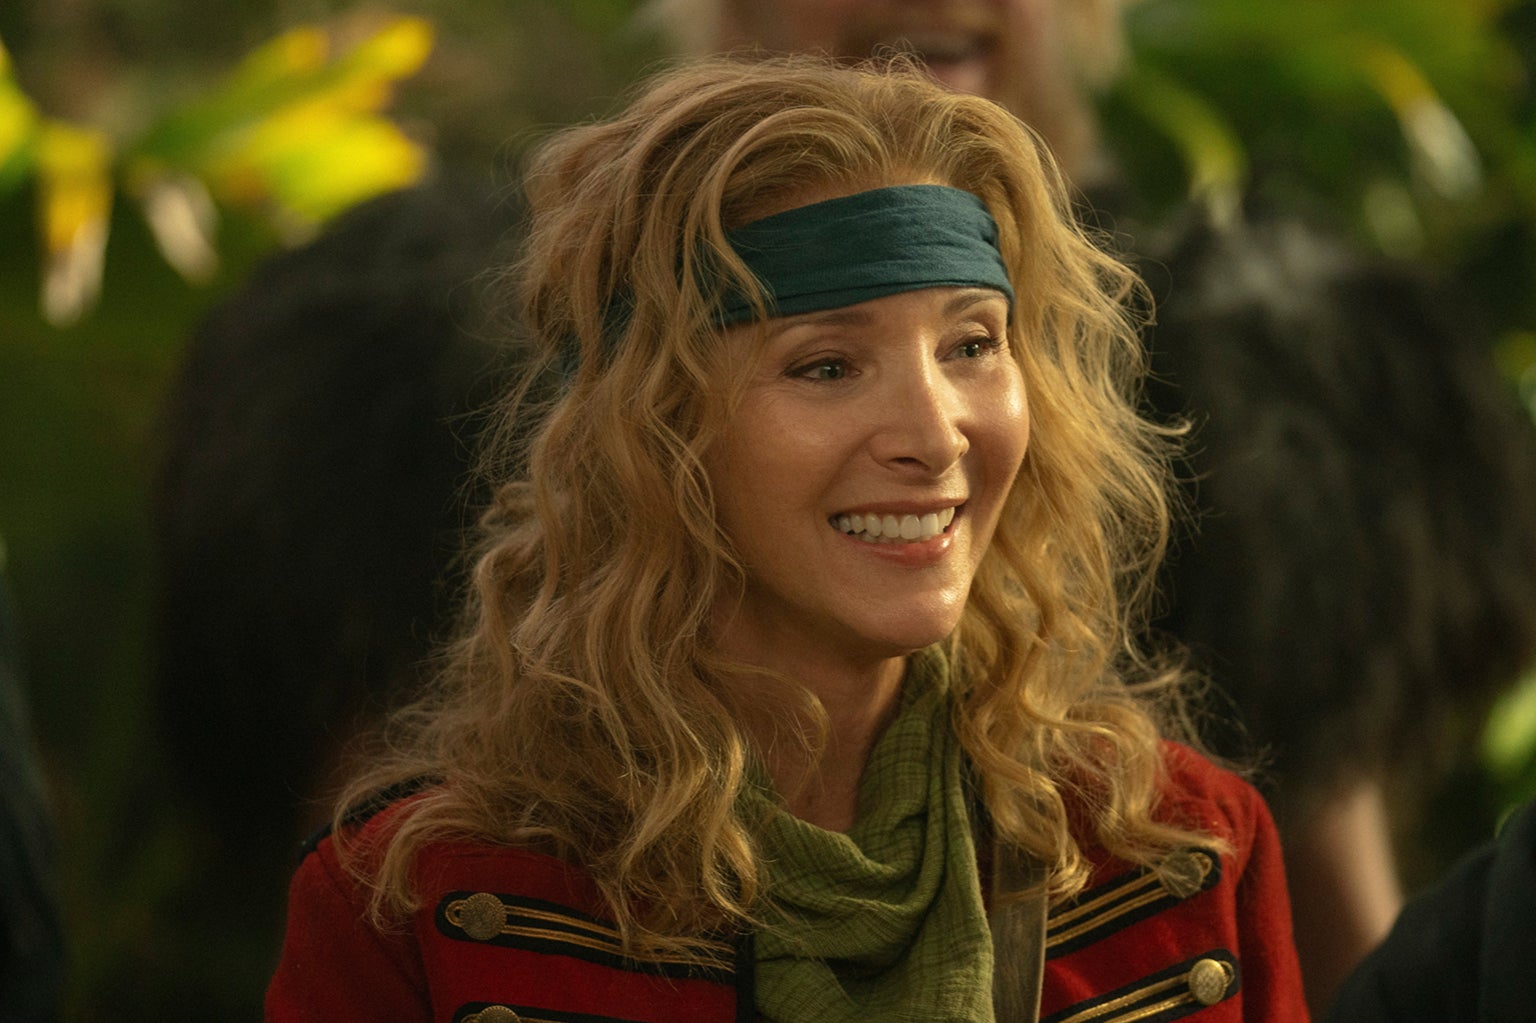 About time: Kudrow in her new Apple TV+ comedy ‘Time Bandits’